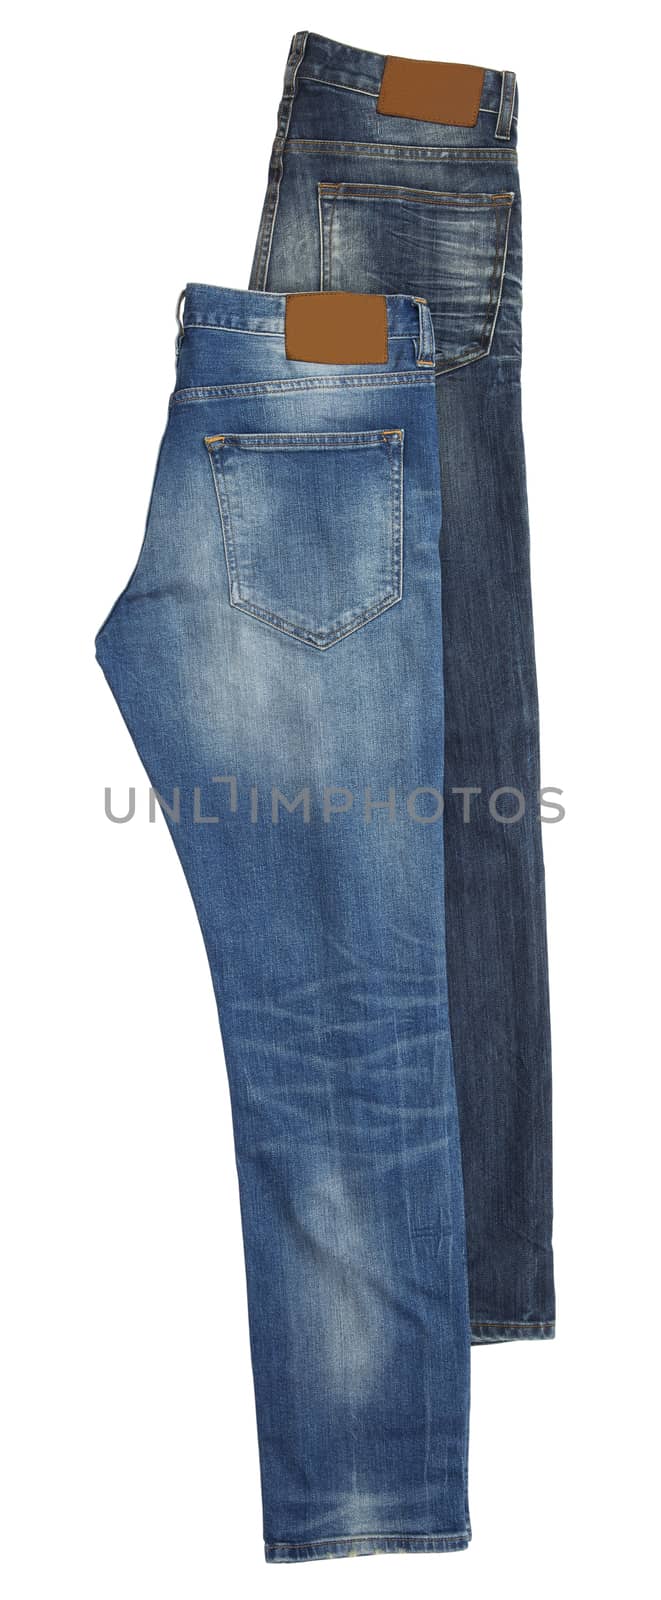 Two pair of blue jeans by gemenacom